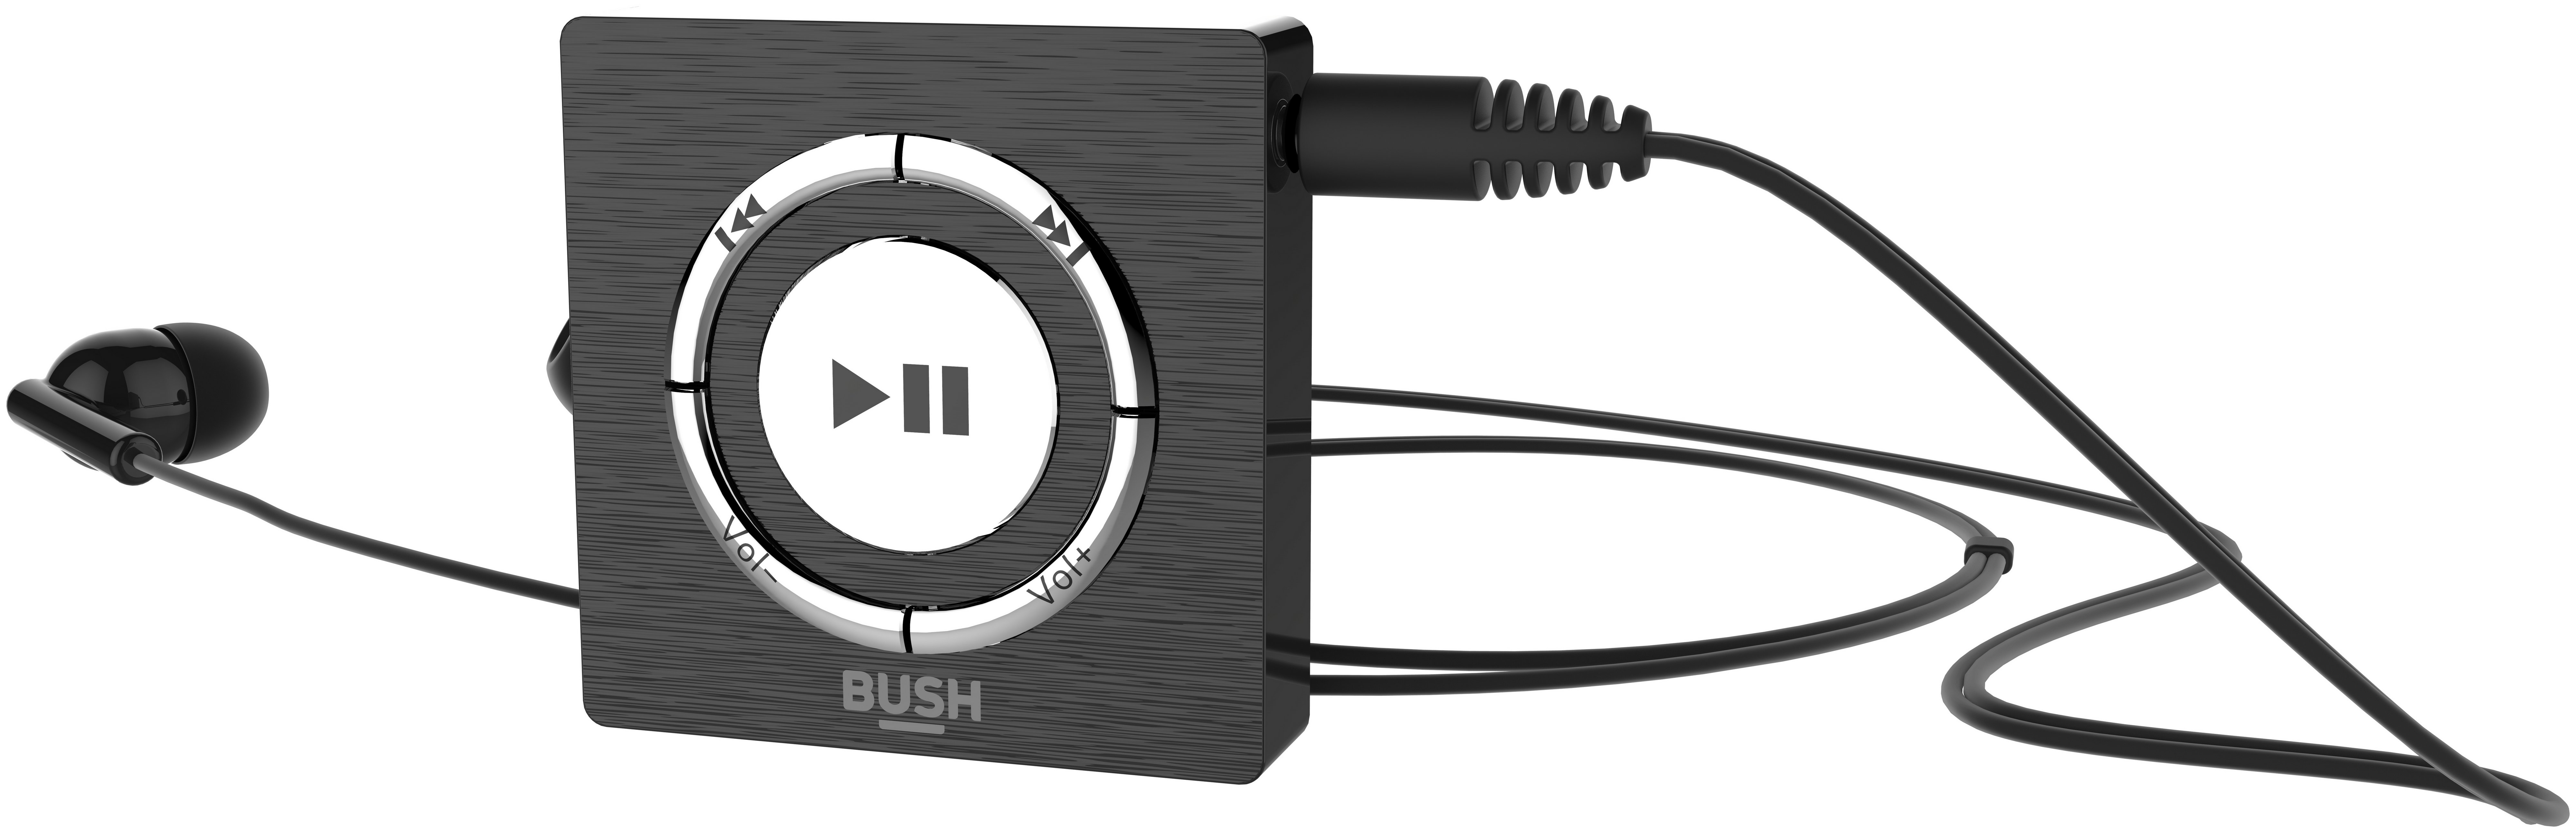 bush-kw-mp01-4gb-mp3-video-player-black-review-reviews-for-you